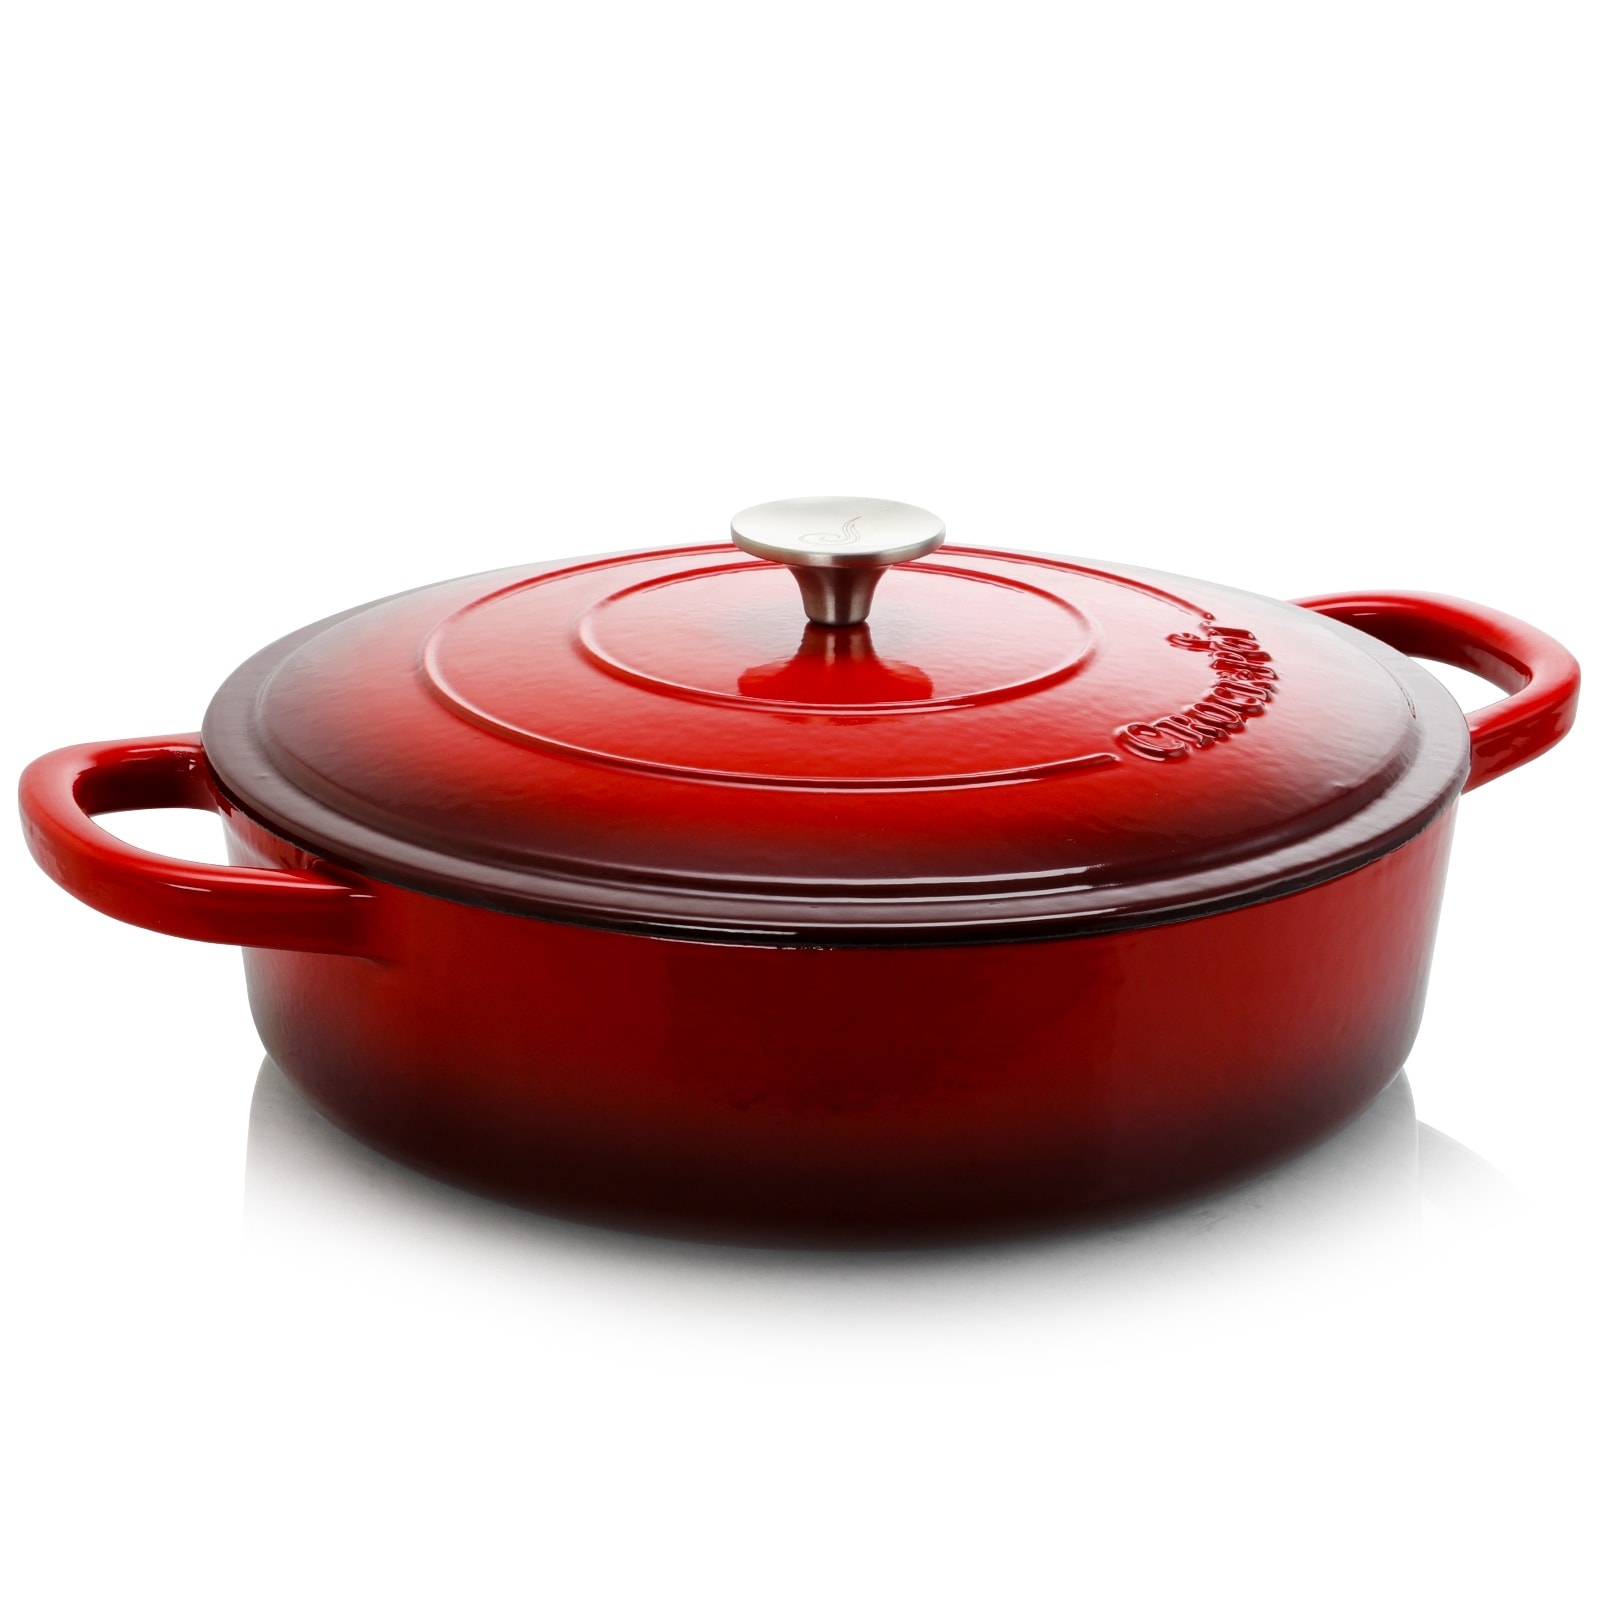 https://ak1.ostkcdn.com/images/products/is/images/direct/69499778e68fc398a8ef2fa956fe873cc64c2083/Enameled-Cast-Iron-5-Quart-Round-Braising-Pan-W--Lid-in-Ruby.jpg